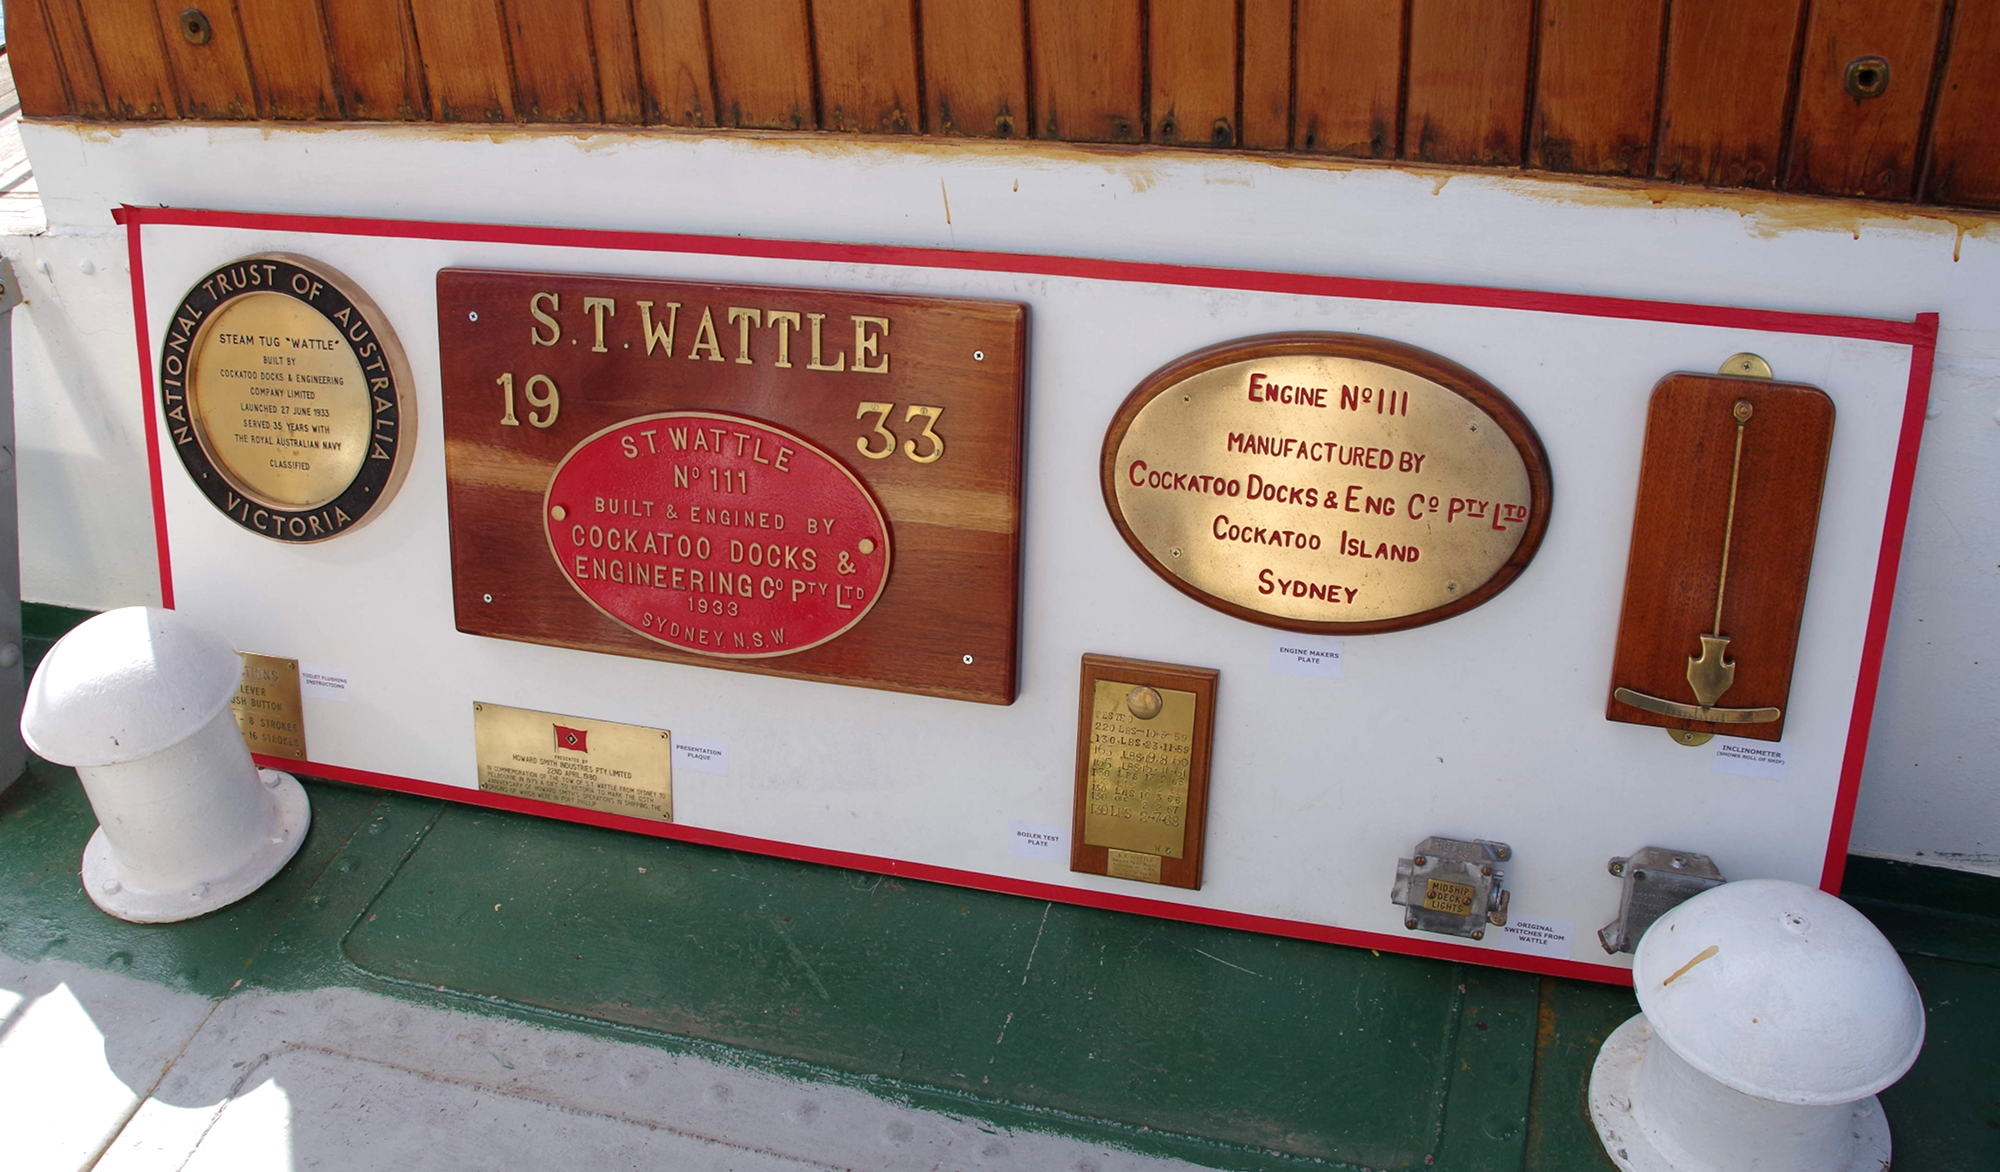 Builder's plaque and artifacts, February 2019, Jeff Malley